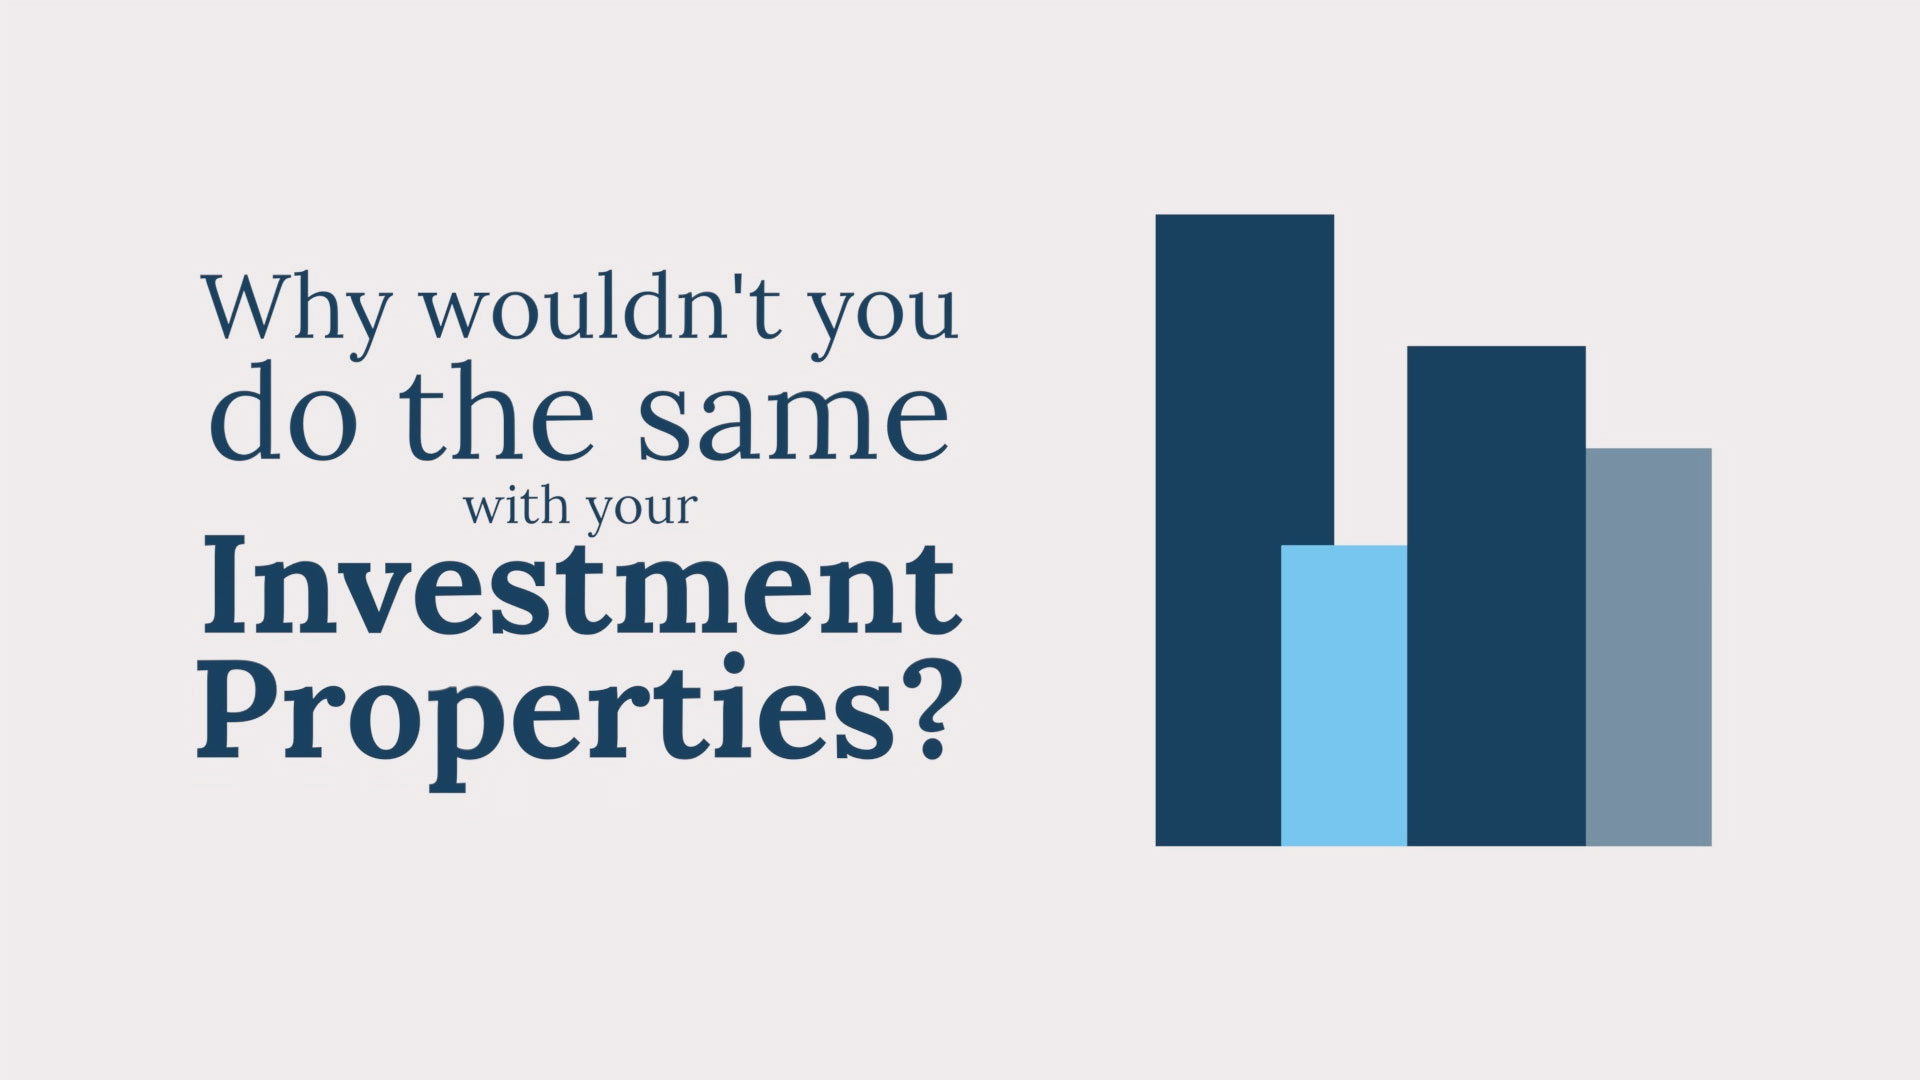 Investment Property Wealth Management [b]